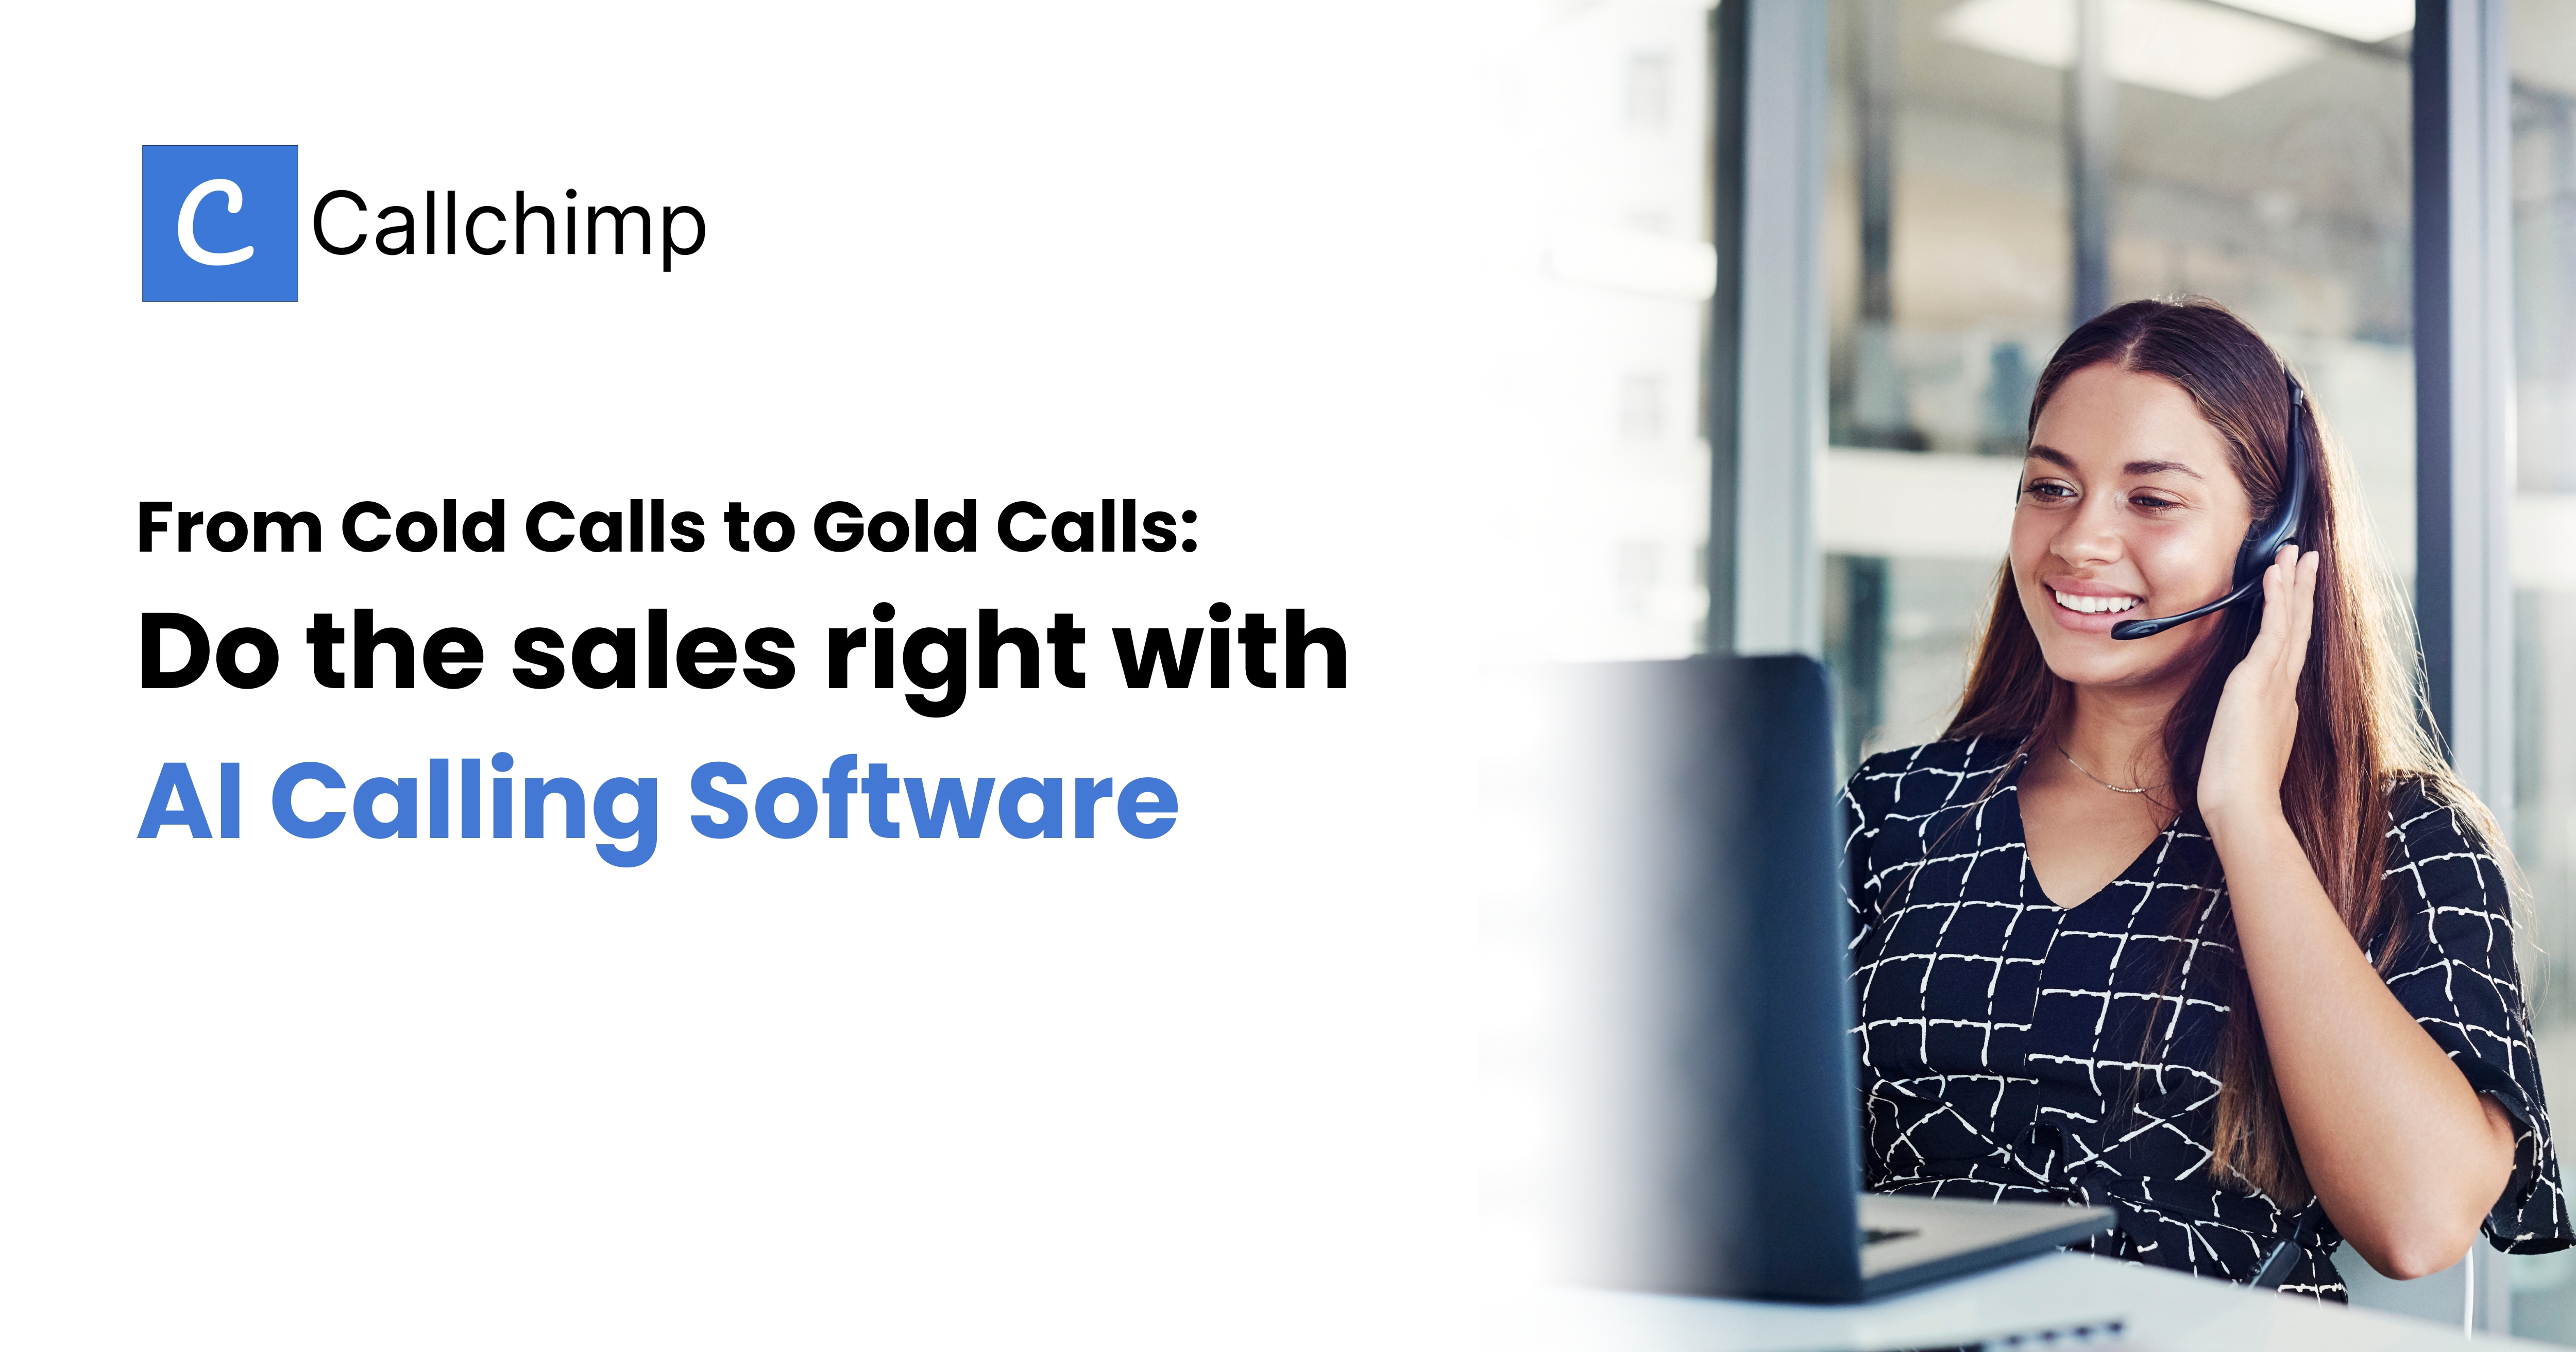 From Cold Calls to Gold Calls: Do the sales right with AI Calling Software